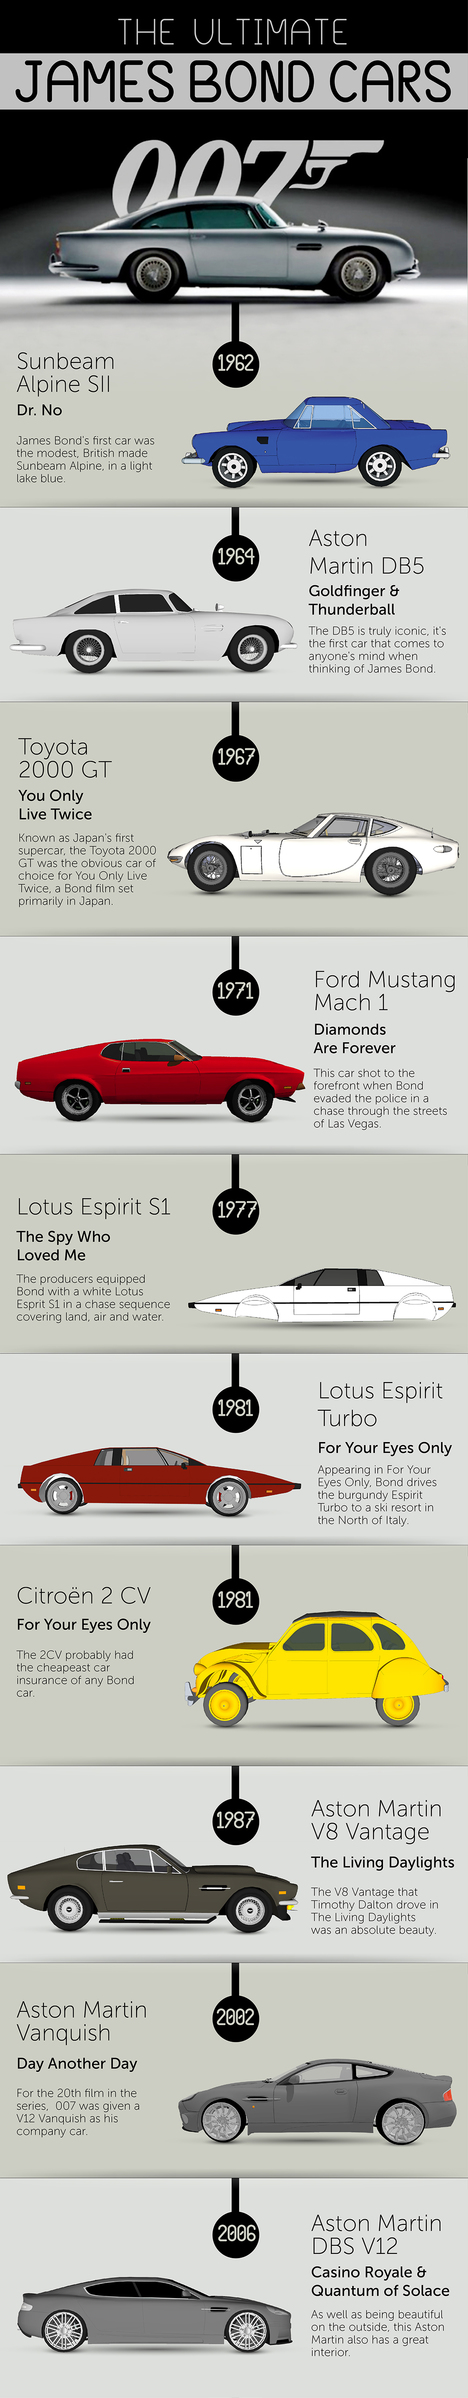  The Ultimate James Bond Cars (Infographic)